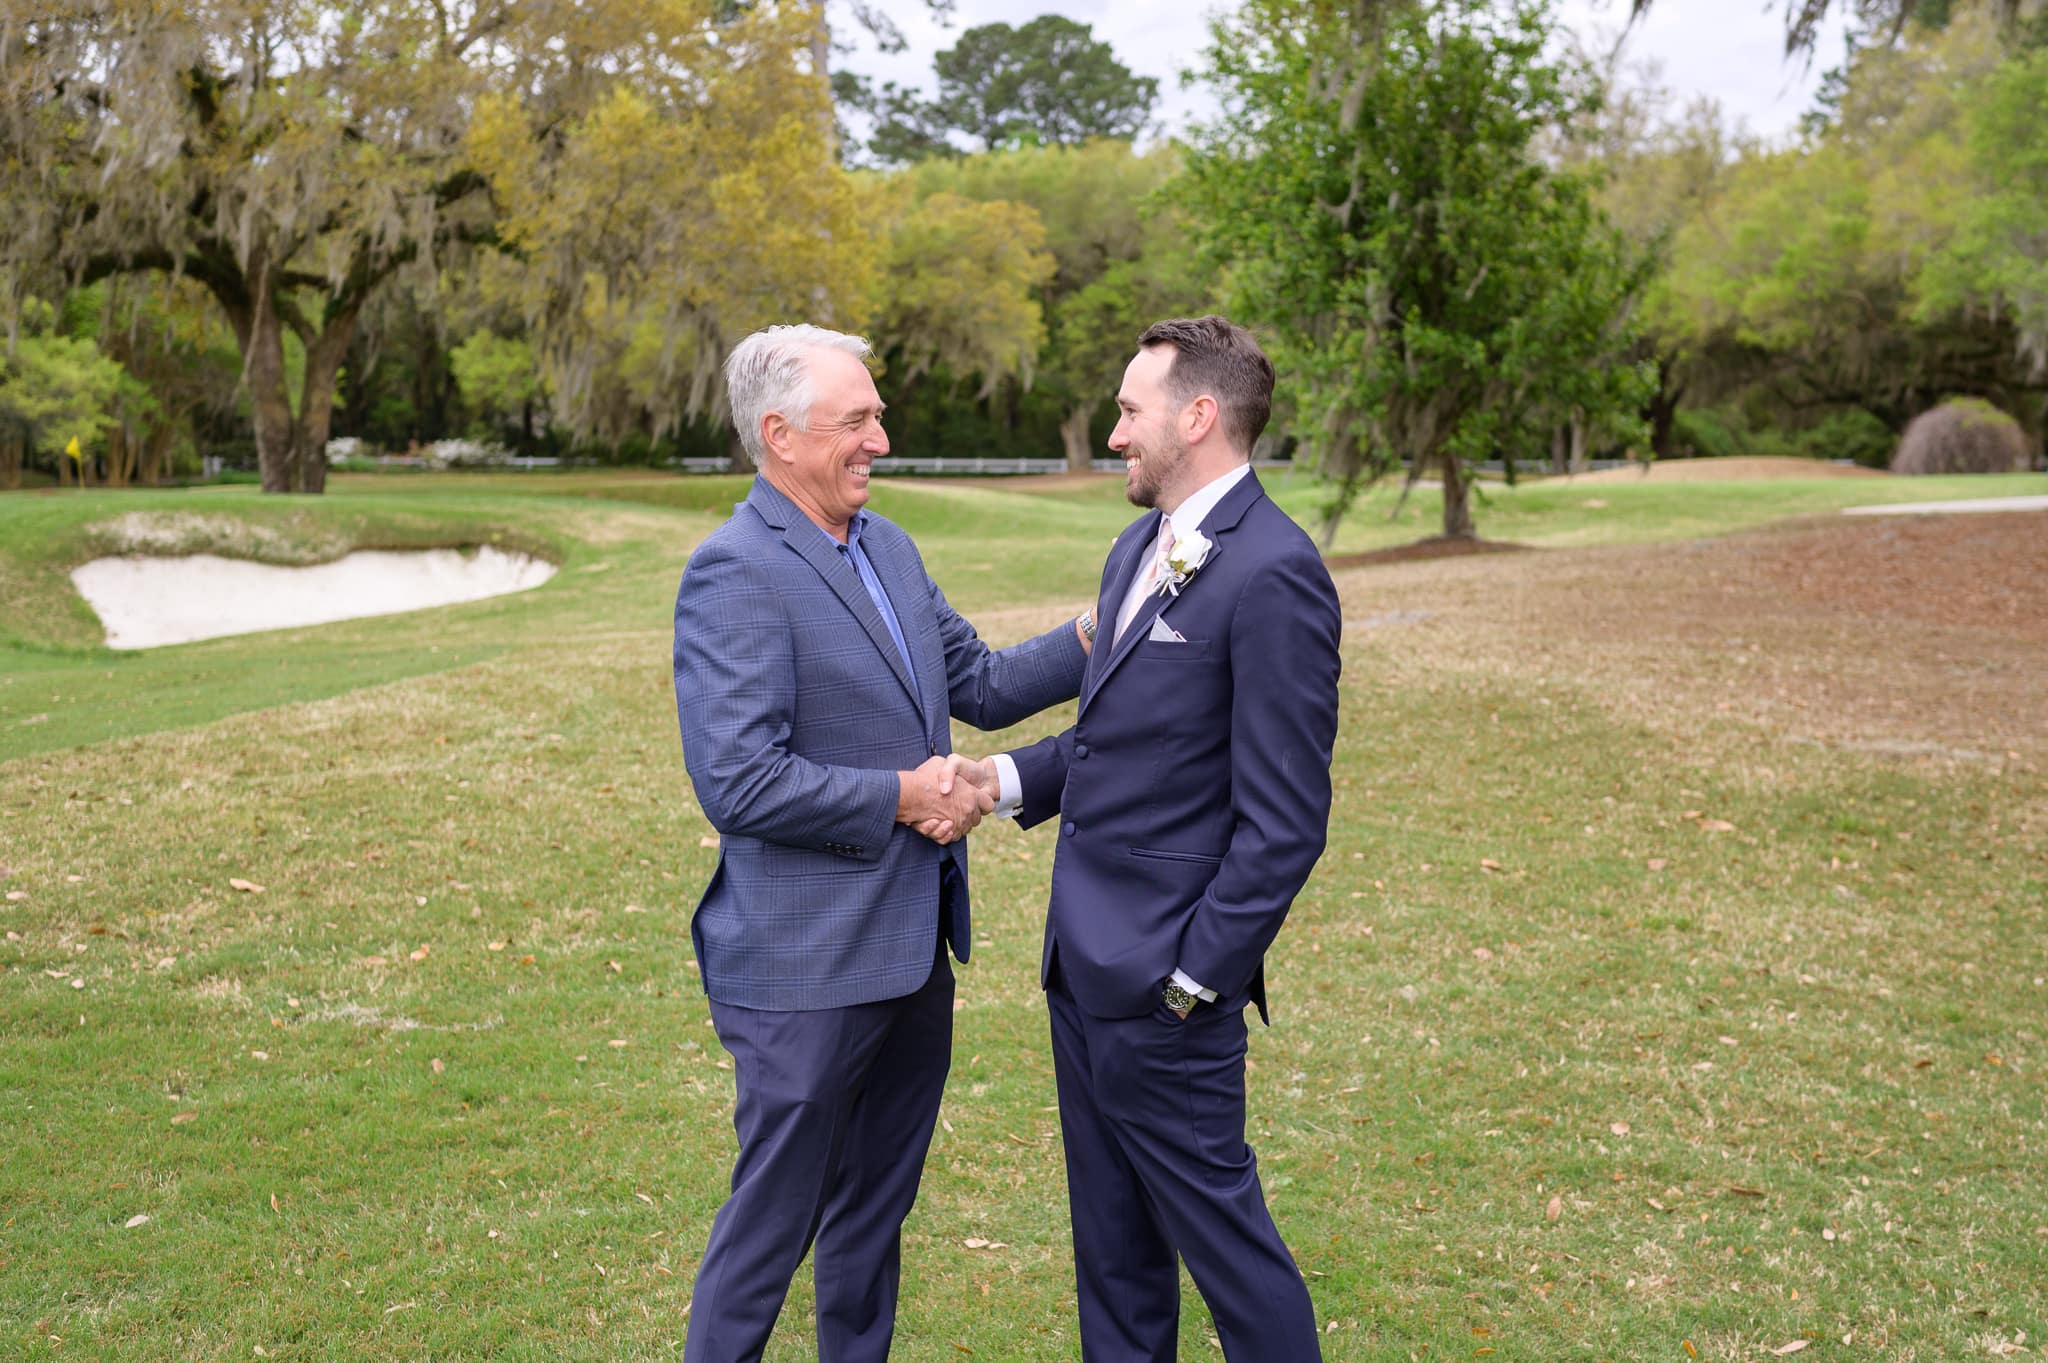 Father shaking hand of the groom - Caledonia Golf & Fish Club